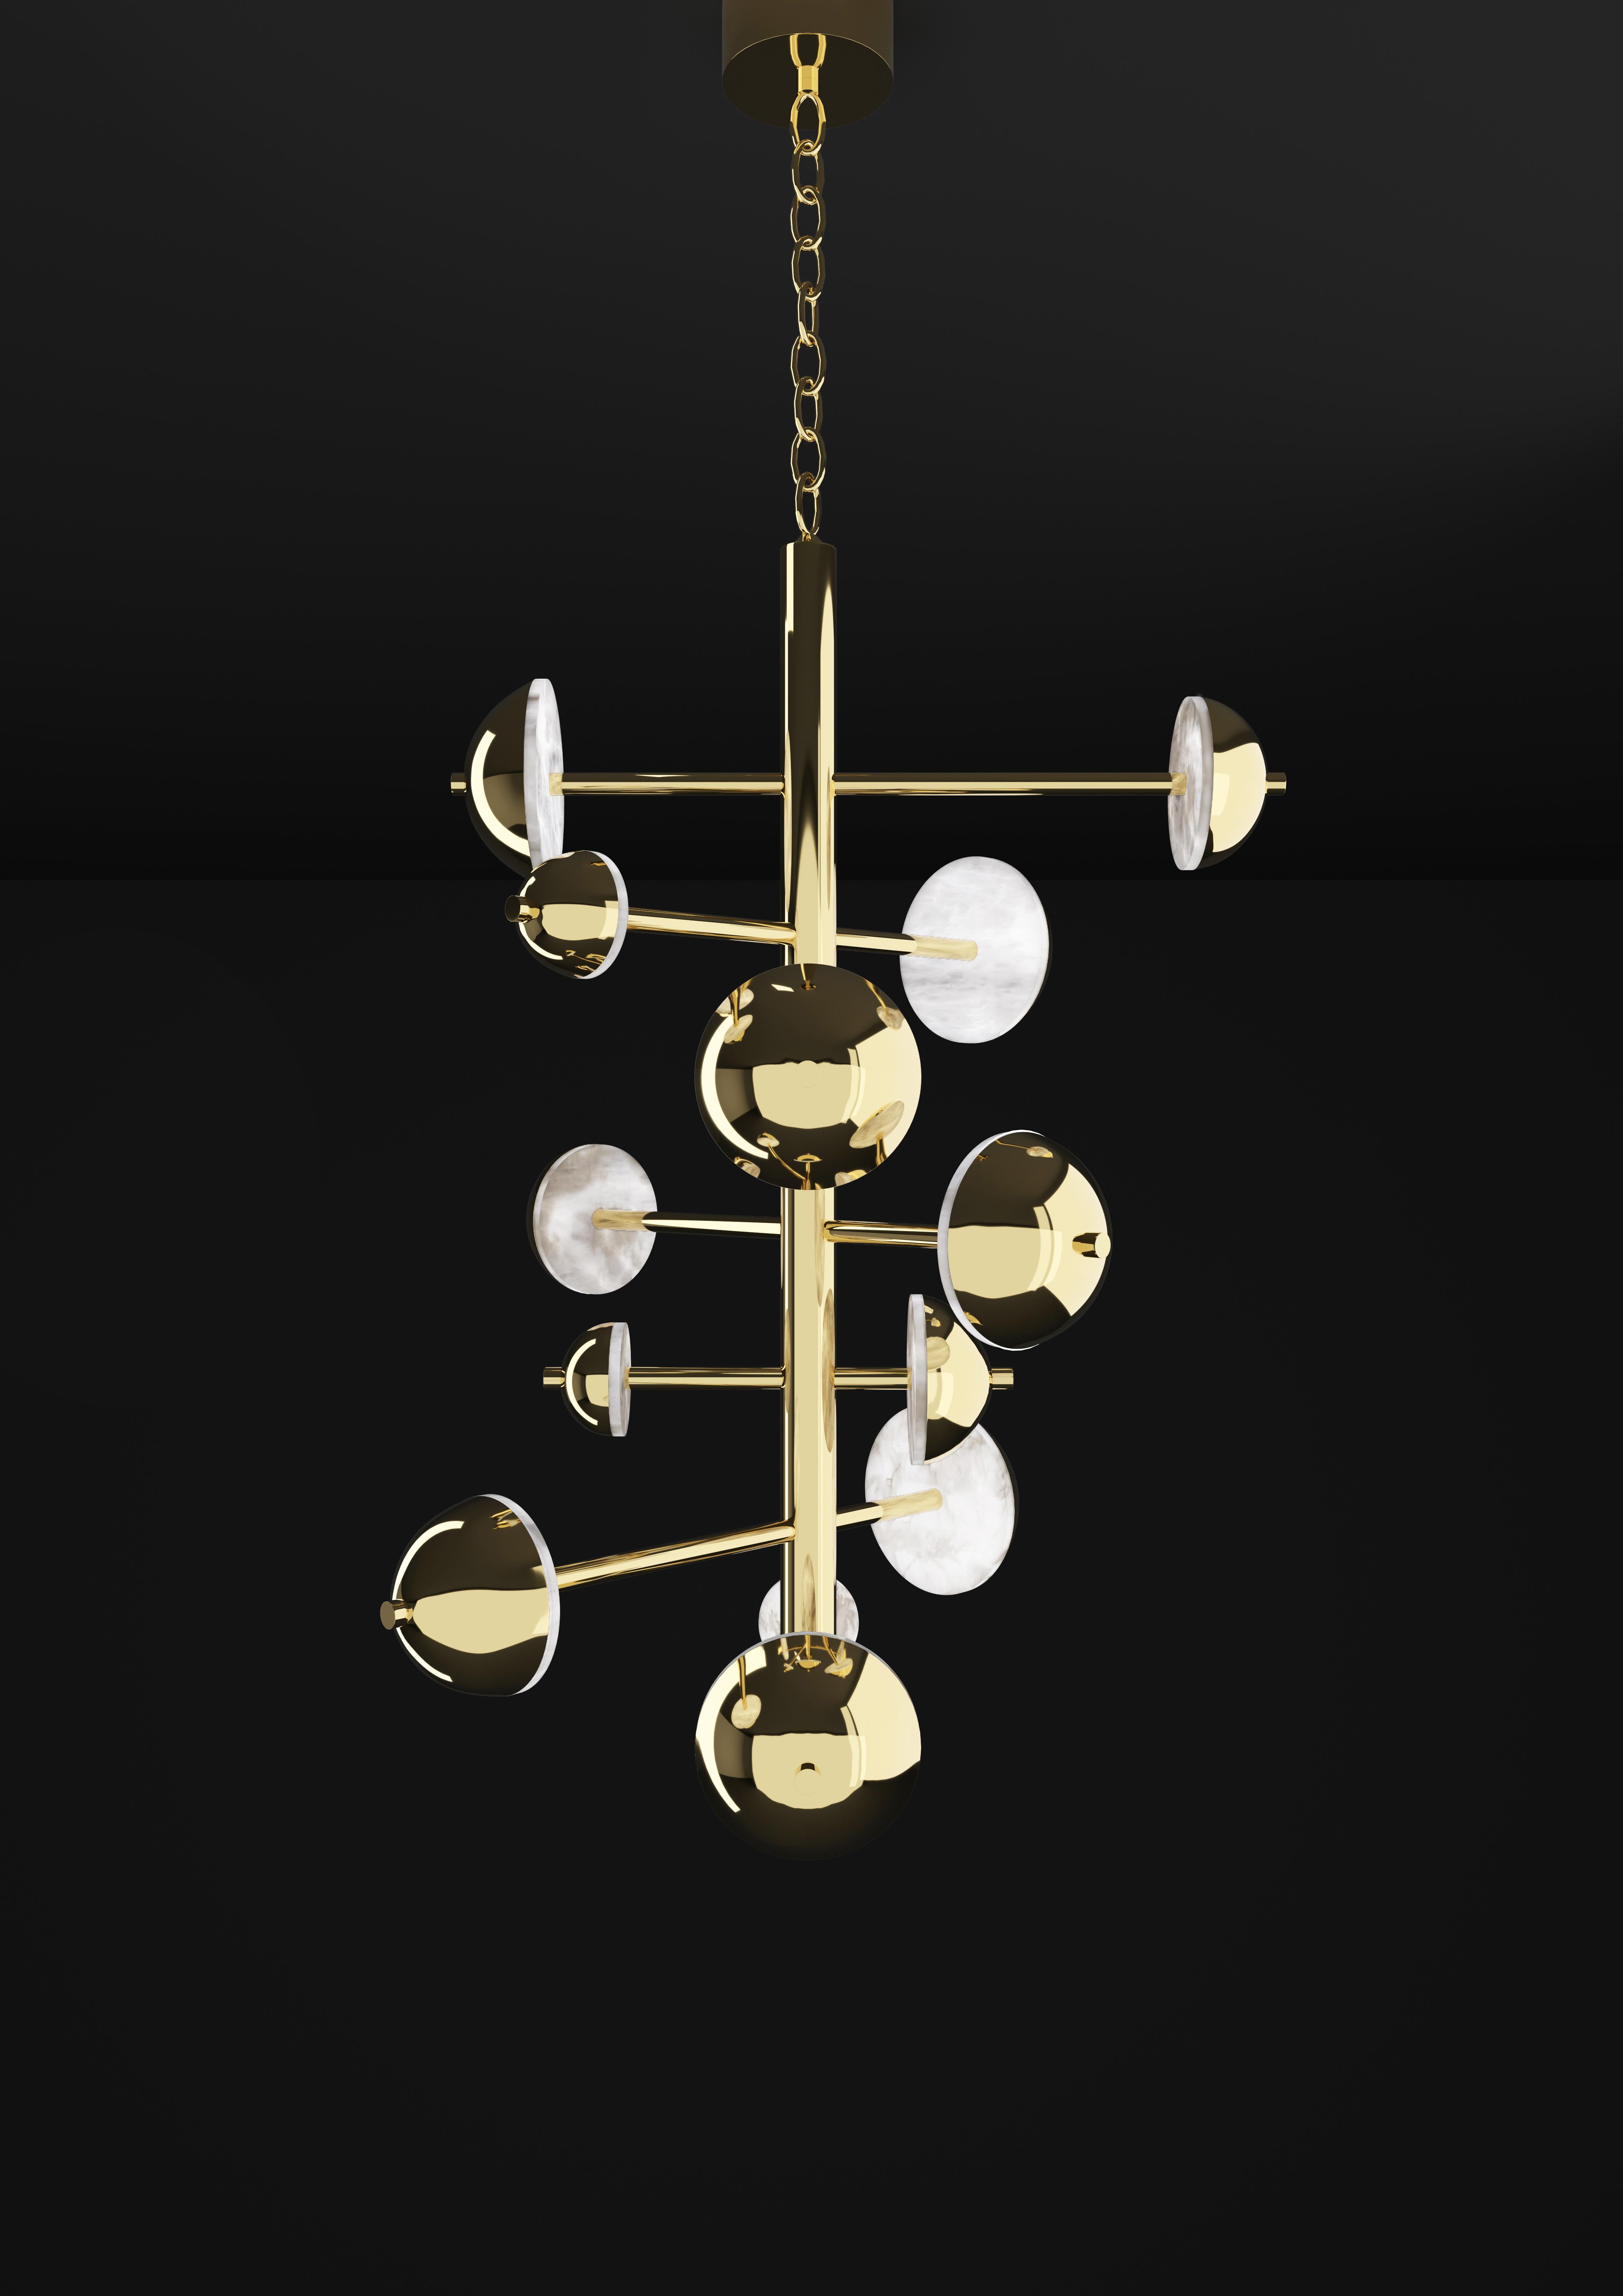 Ares Shiny Gold Metal Chandelier by Alabastro Italiano
Dimensions: D 74,5 x W 73 x H 110 cm.
Materials: White alabaster and metal.

Available in different finishes: Shiny Silver, Bronze, Brushed Brass, Ruggine of Florence, Brushed Burnished, Shiny